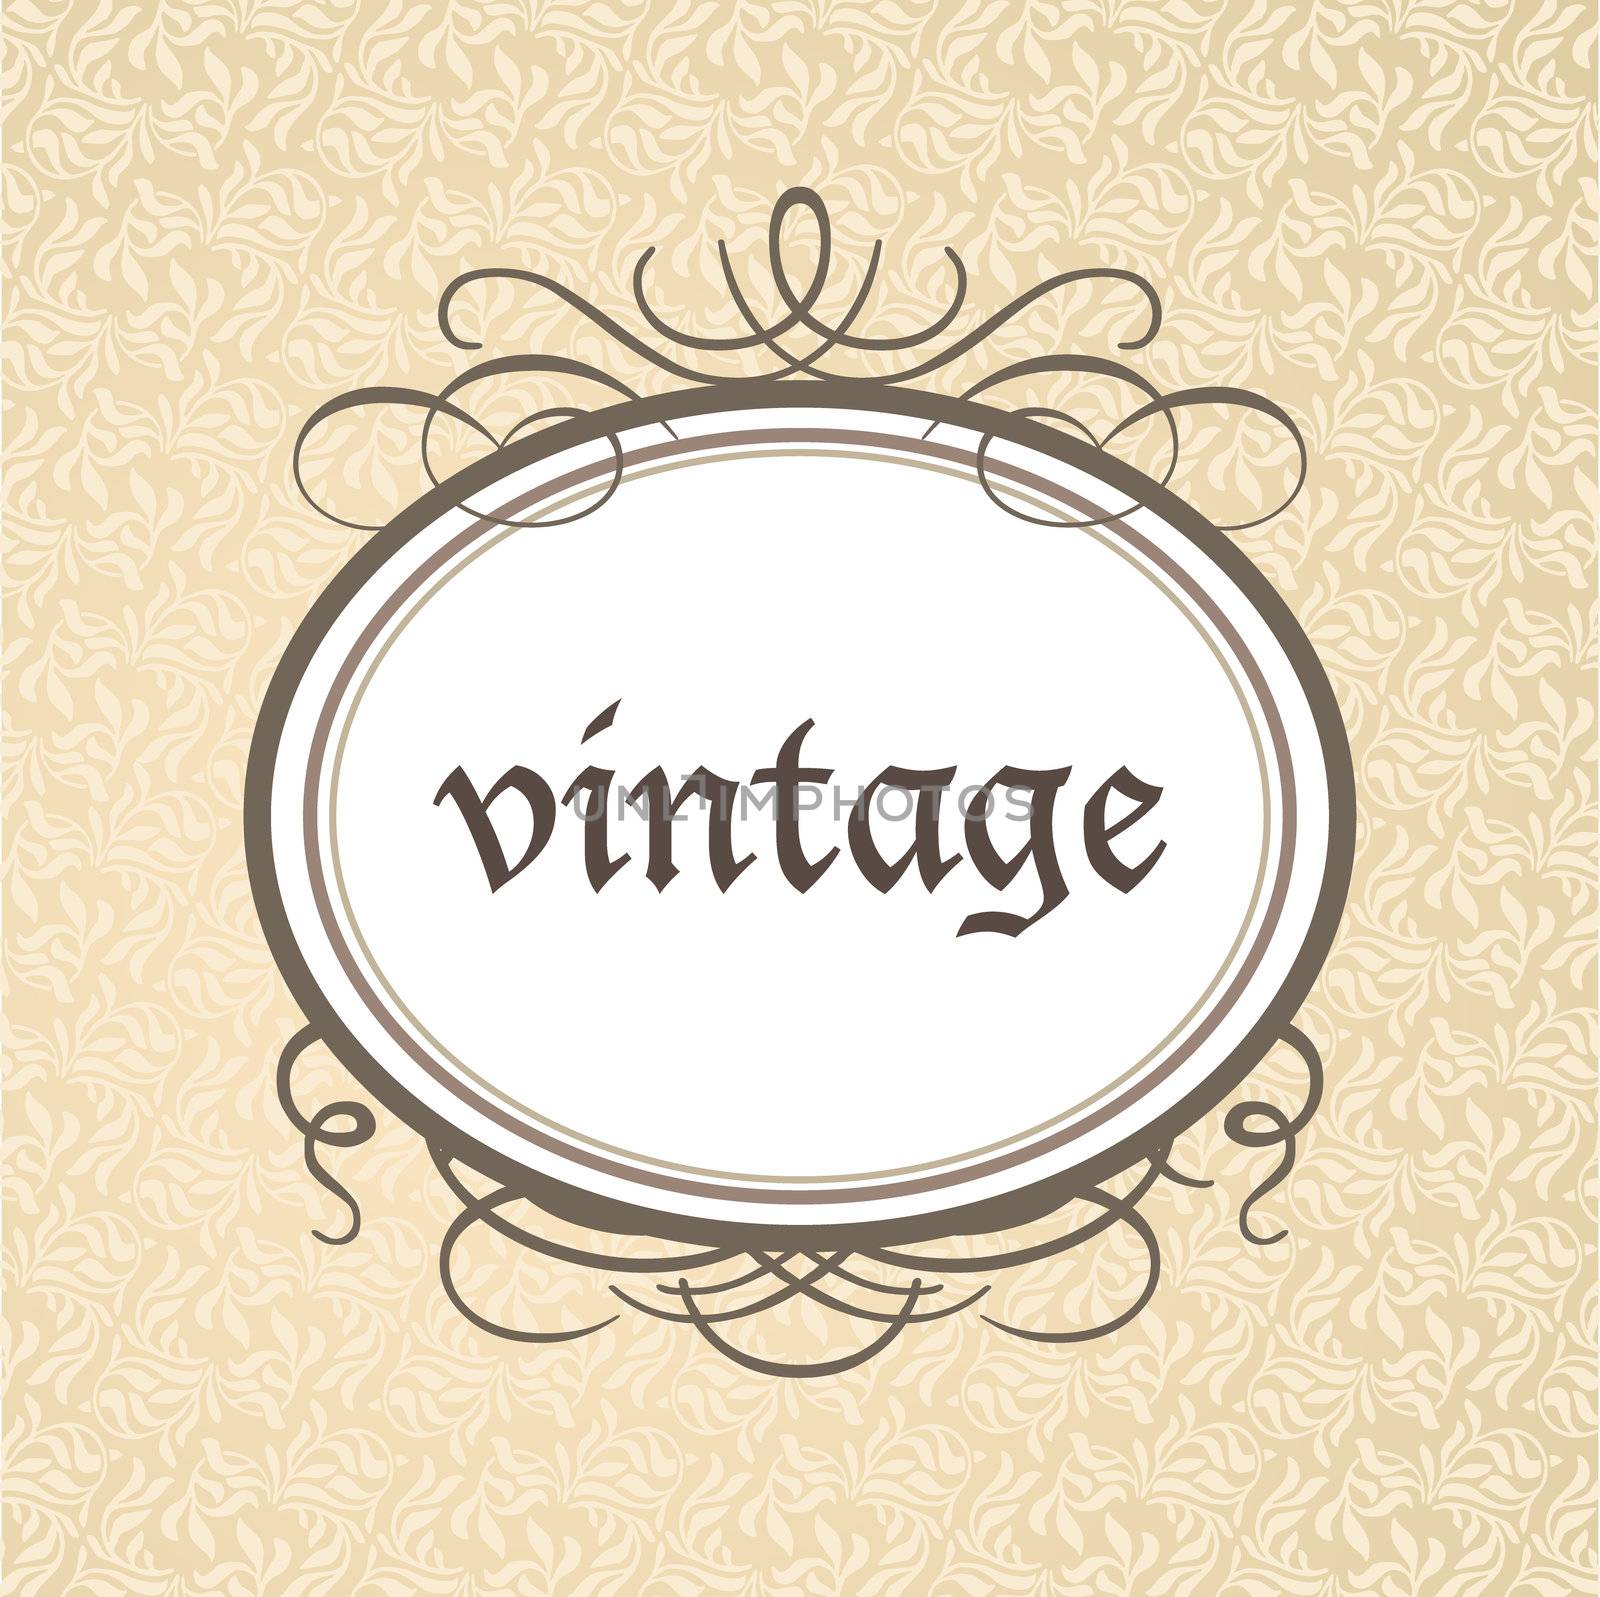 Template framework - a luxurious vintage style.